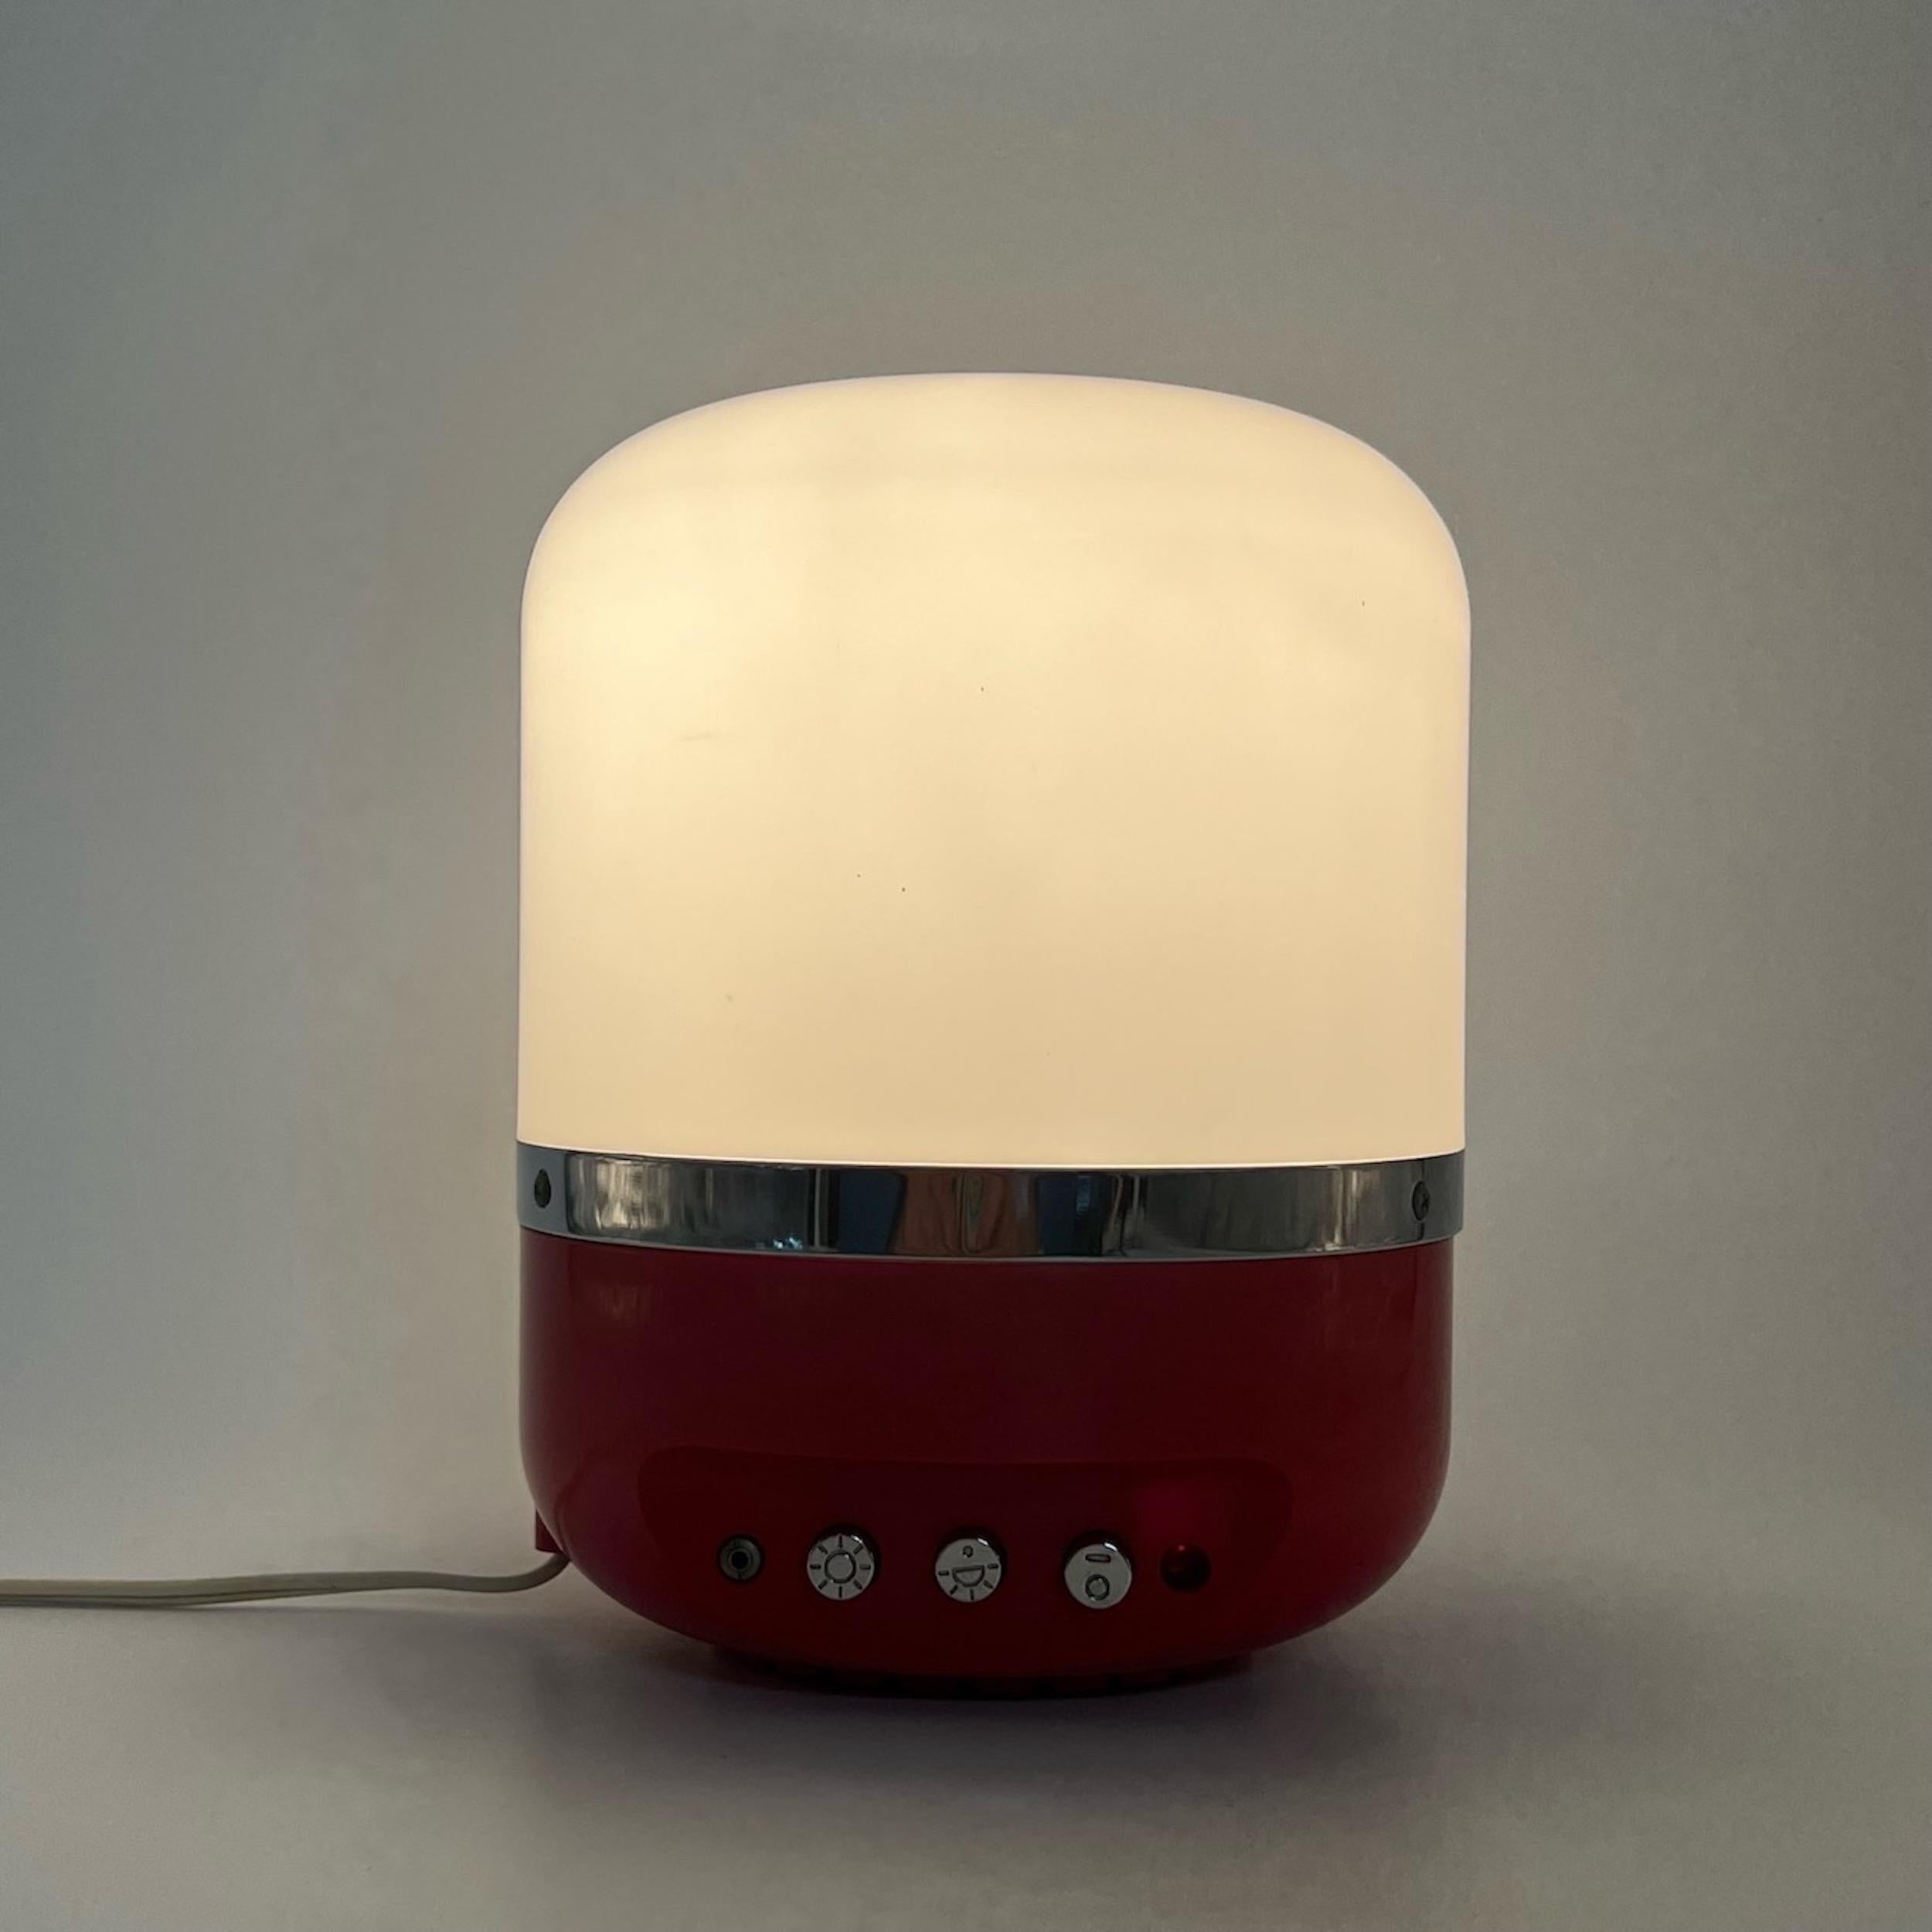 Iconic table / desk lamp Europhon designed by Adriano Rampoldi. This piece comes with the iconic flame red color perfectly matching the beige lampshade. The color combination and the rounded shape evoke the 70s atmospheres for a perfect vintage